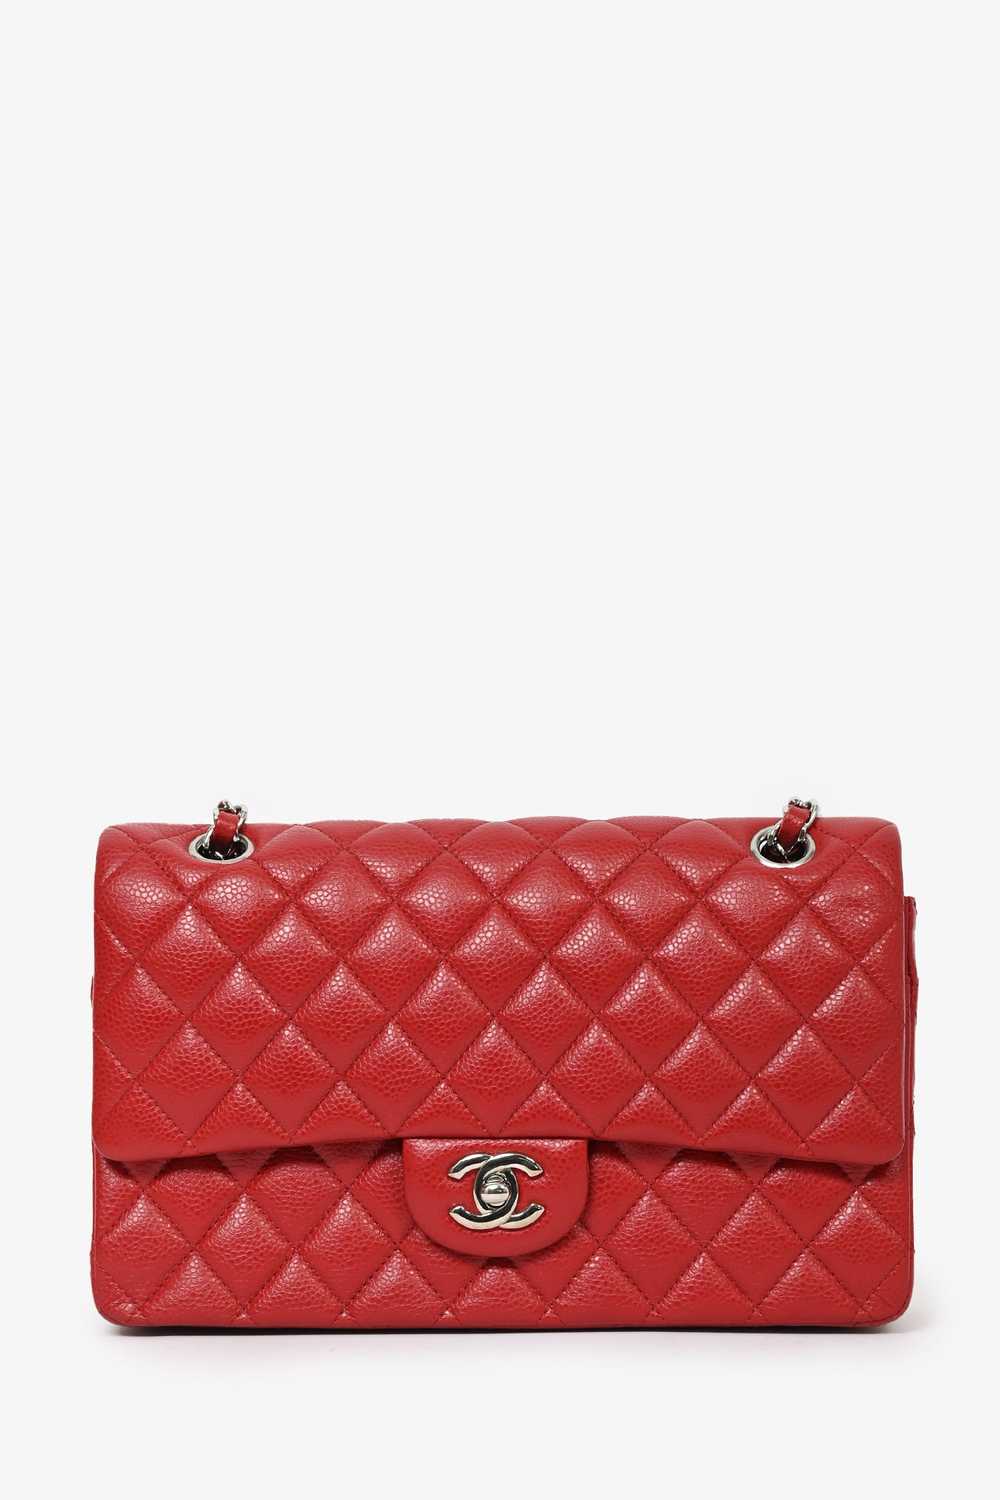 Pre-loved Chanel™ 2011 Red Caviar Leather Medium … - image 3